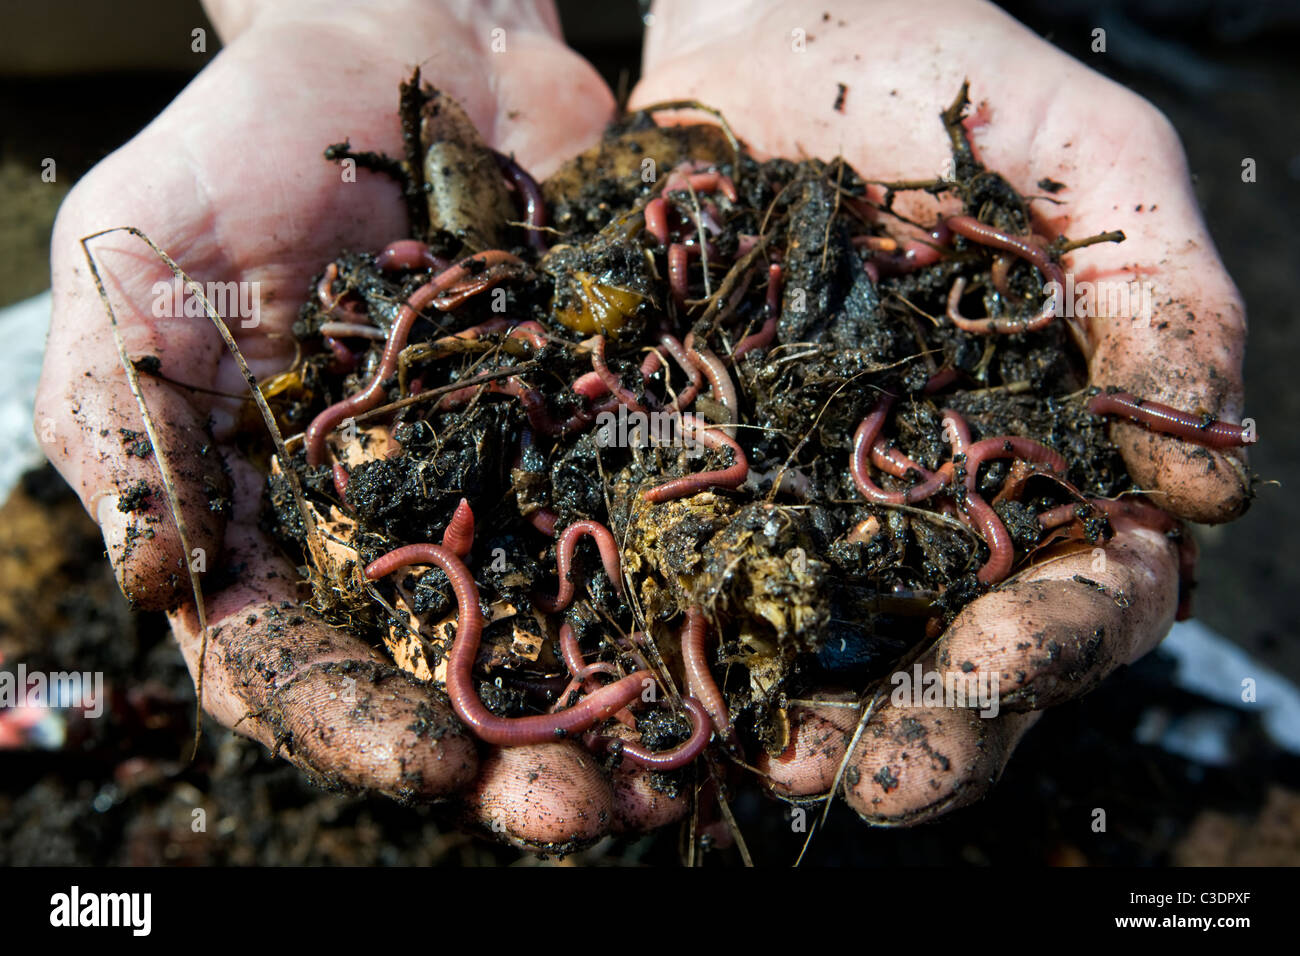 Close up of mans hands holding earth worms in freshly dug soil from compost heap Stock Photo